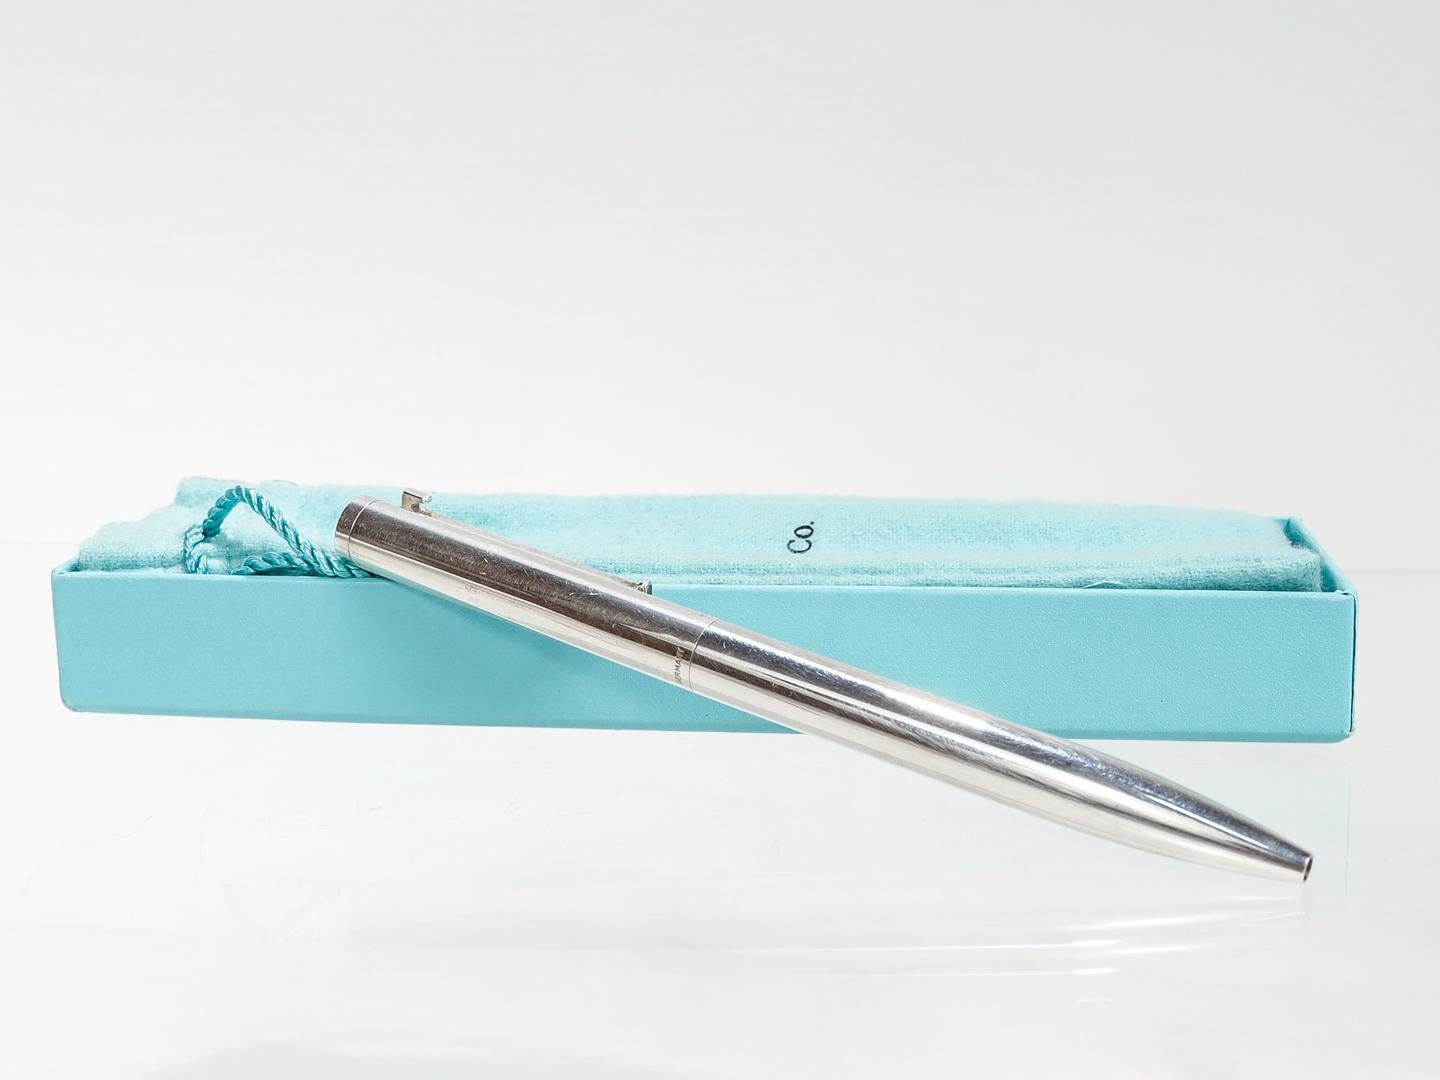 A fine T Clip Executive ballpoint pen.

By Tiffany & Co.

In sterling silver.

Together with its original box and pouch.

Simply a wonderful Tiffany item for everyday!

Date:
20th Century

Overall Condition:
It is in overall good, as-pictured, used